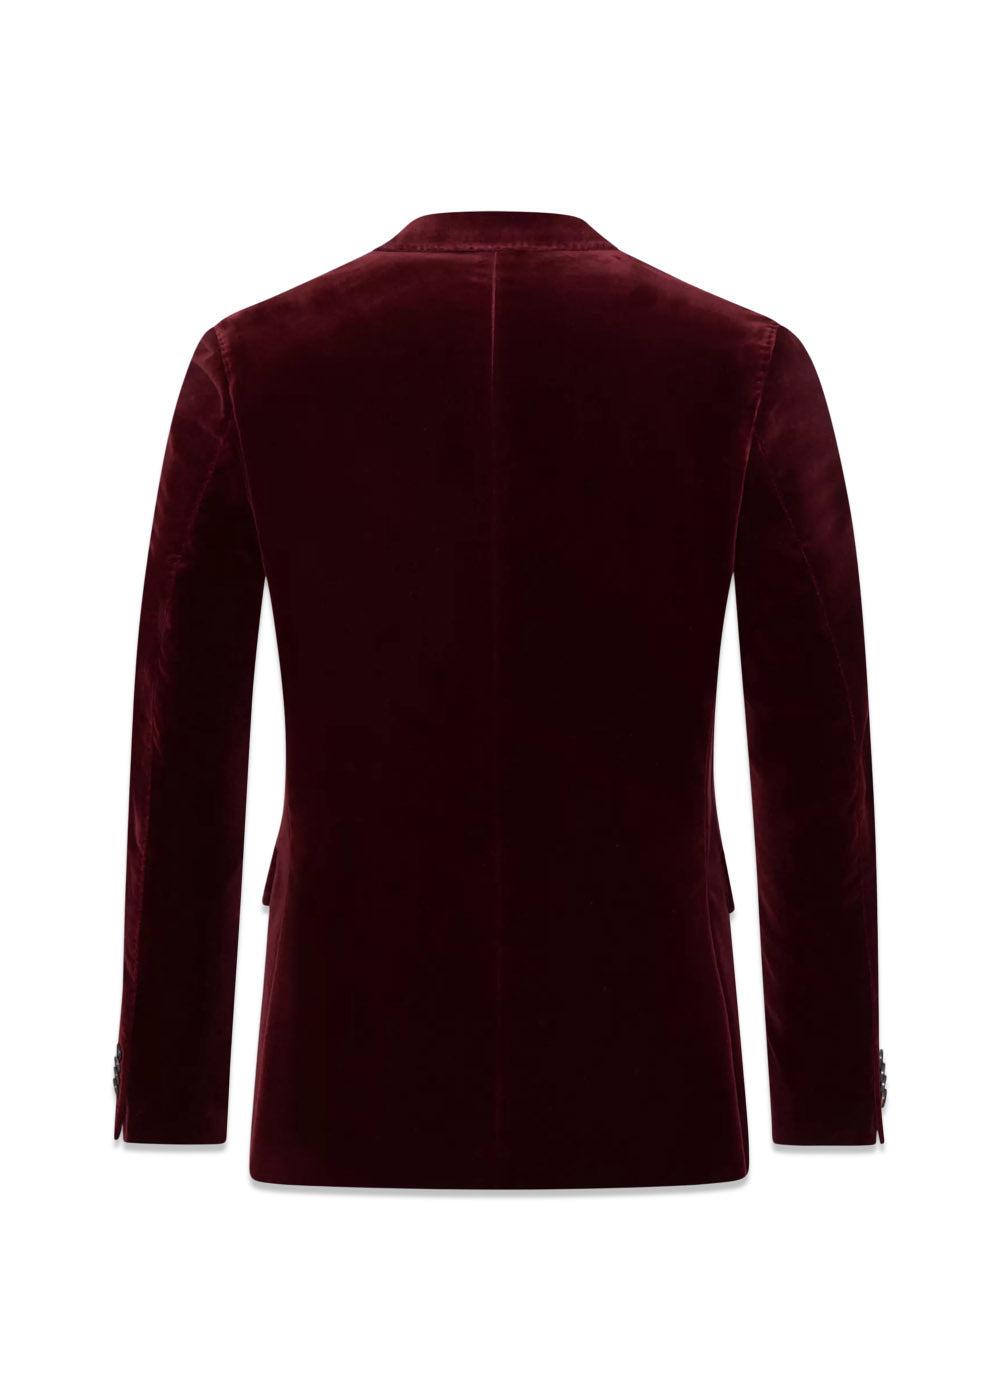 Fogerty Blazer - Leather Red Brown